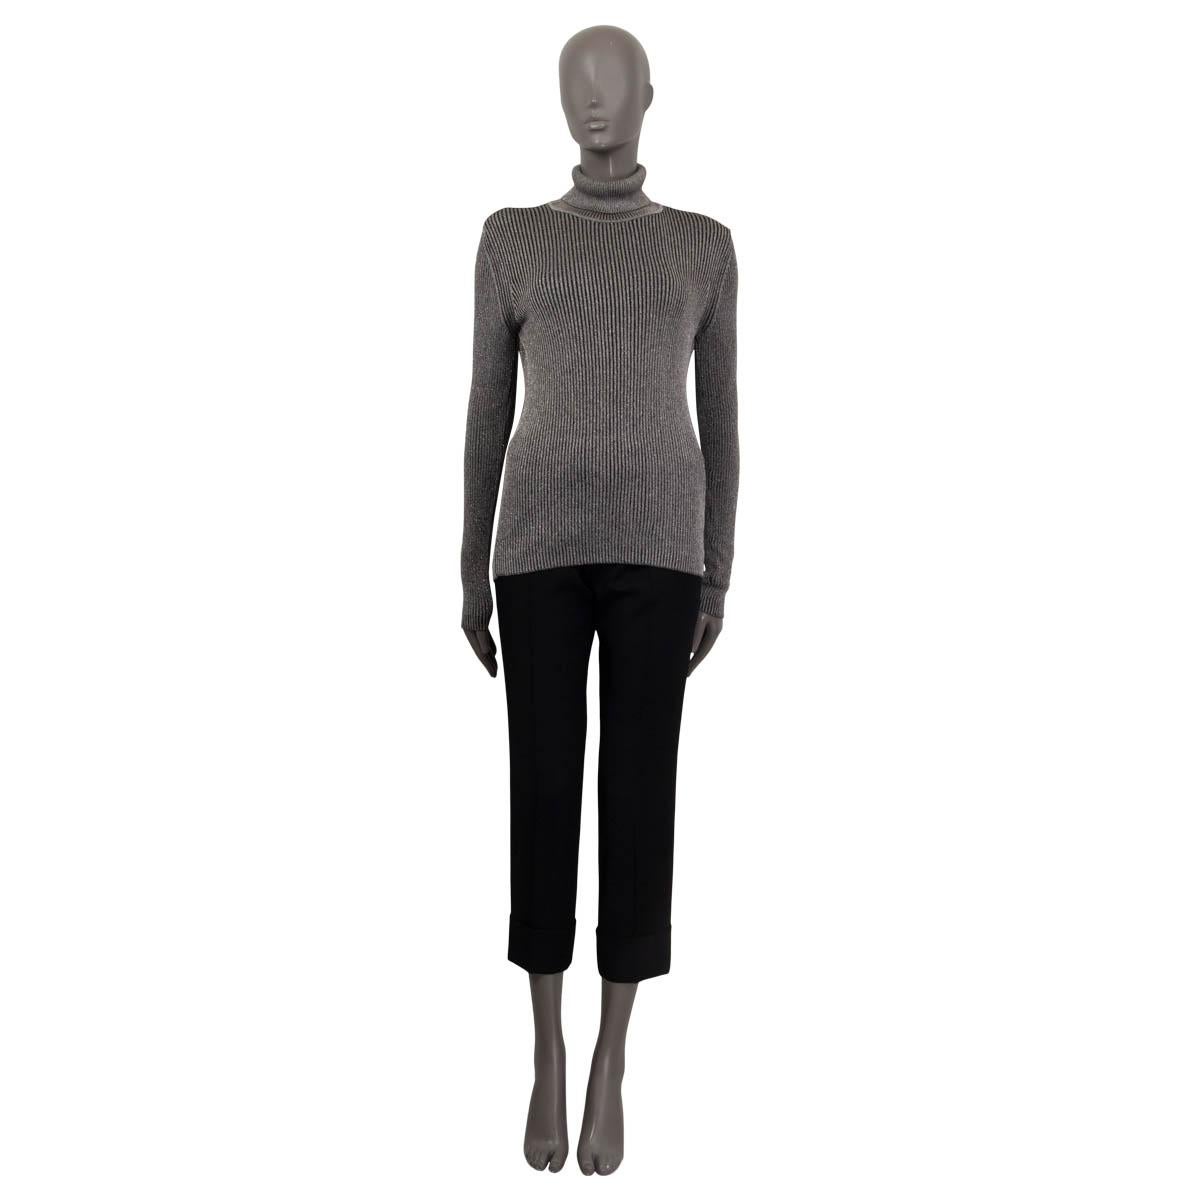 100% authentic Christian Dior sweater in silver and black viscose (84%) and polyester (16%). Features long sleeves and a turtle neck. Unlined. Has been worn and is in excellent condition. 

Measurements
Tag Size	L
Size	L
Shoulder Width	35cm